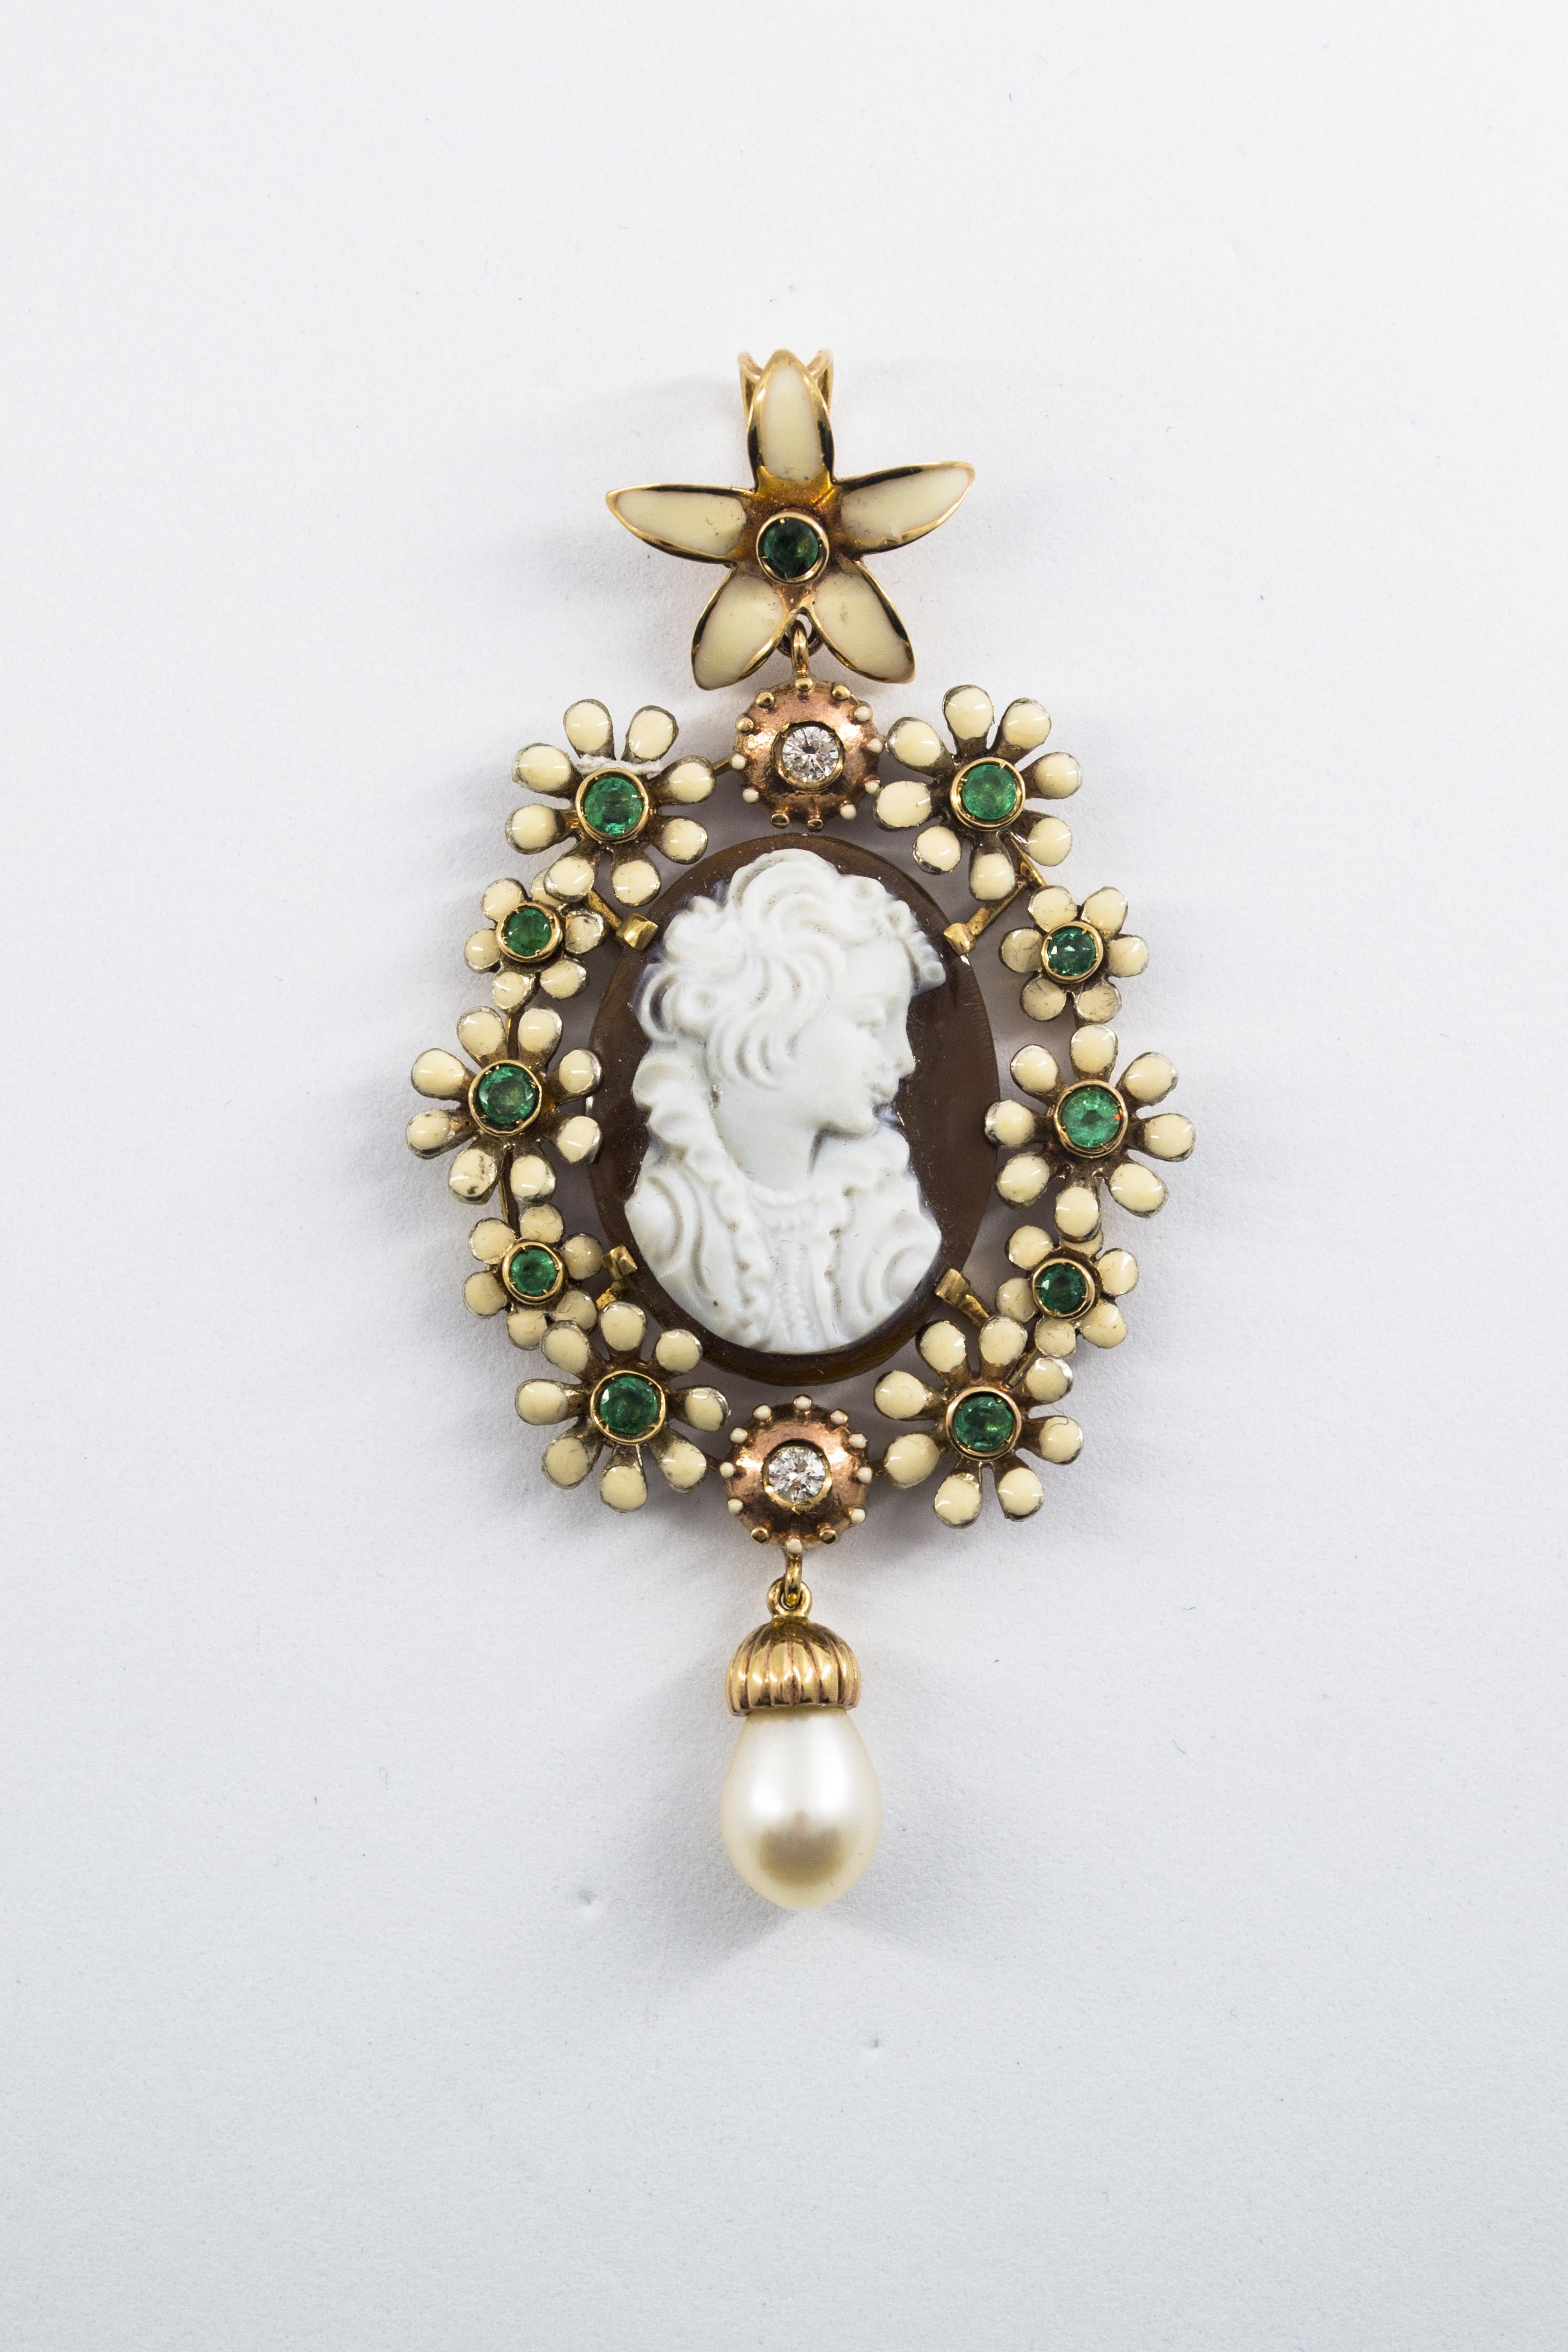 This Pendant is made of 9K Yellow Gold.
This Pendant has 0.14 Carats of White Diamonds.
This Pendant has 0.70 Carats of Emeralds.
This Pendant has also Enamel, Pearl and Carved Shell featuring the portrait of a lady.
We're a workshop so every piece